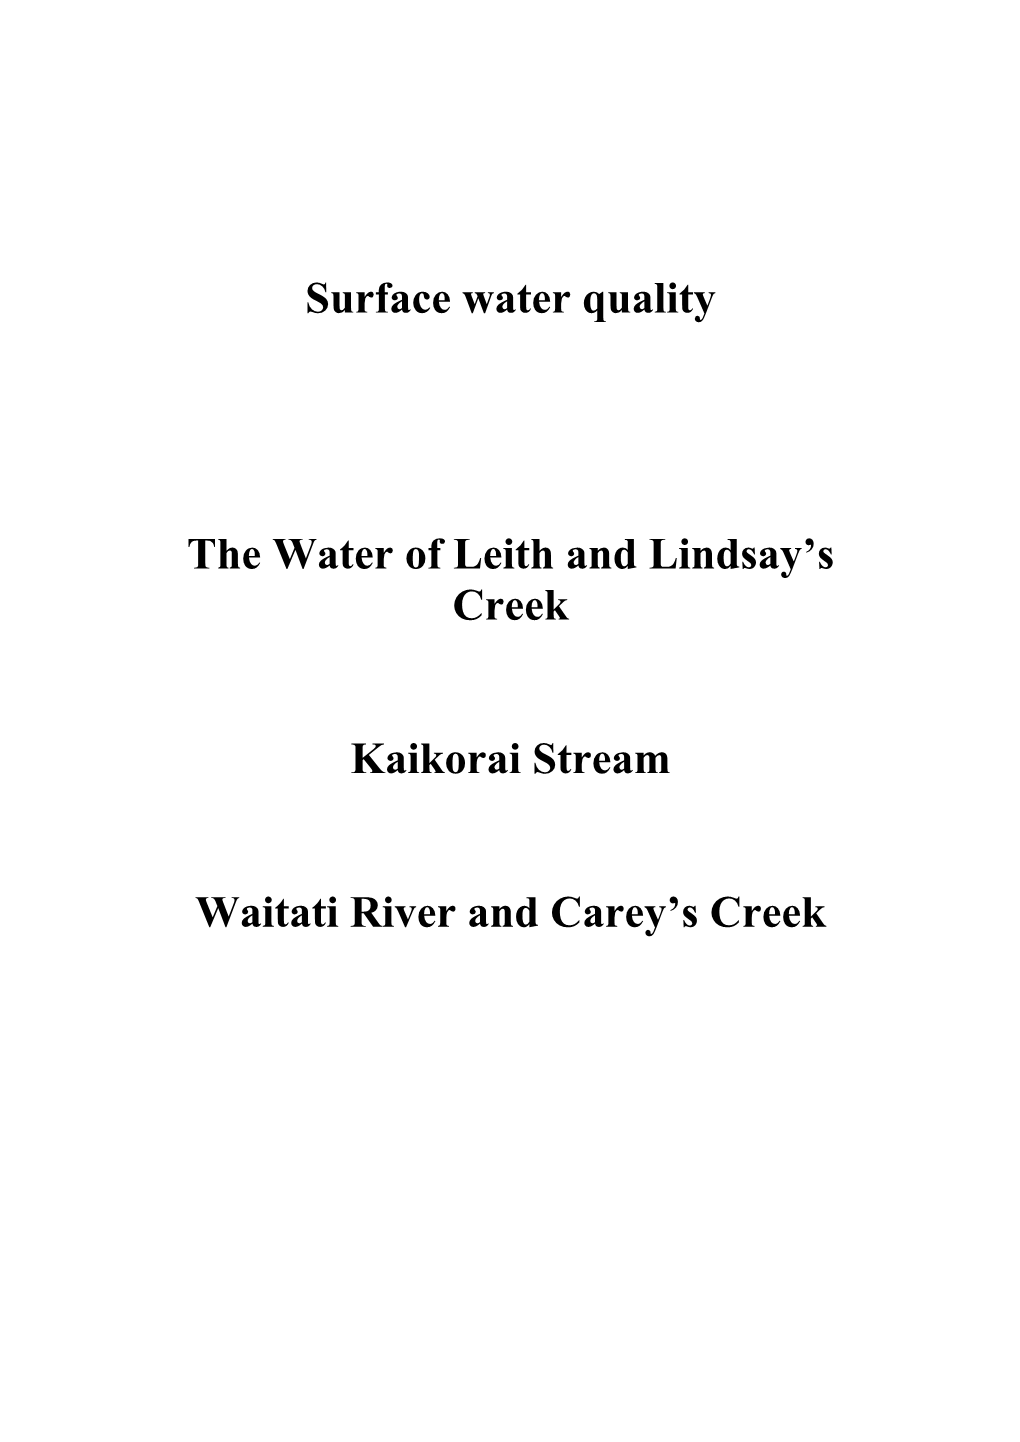 Surface Water Quality the Water of Leith and Lindsay's Creek Kaikorai